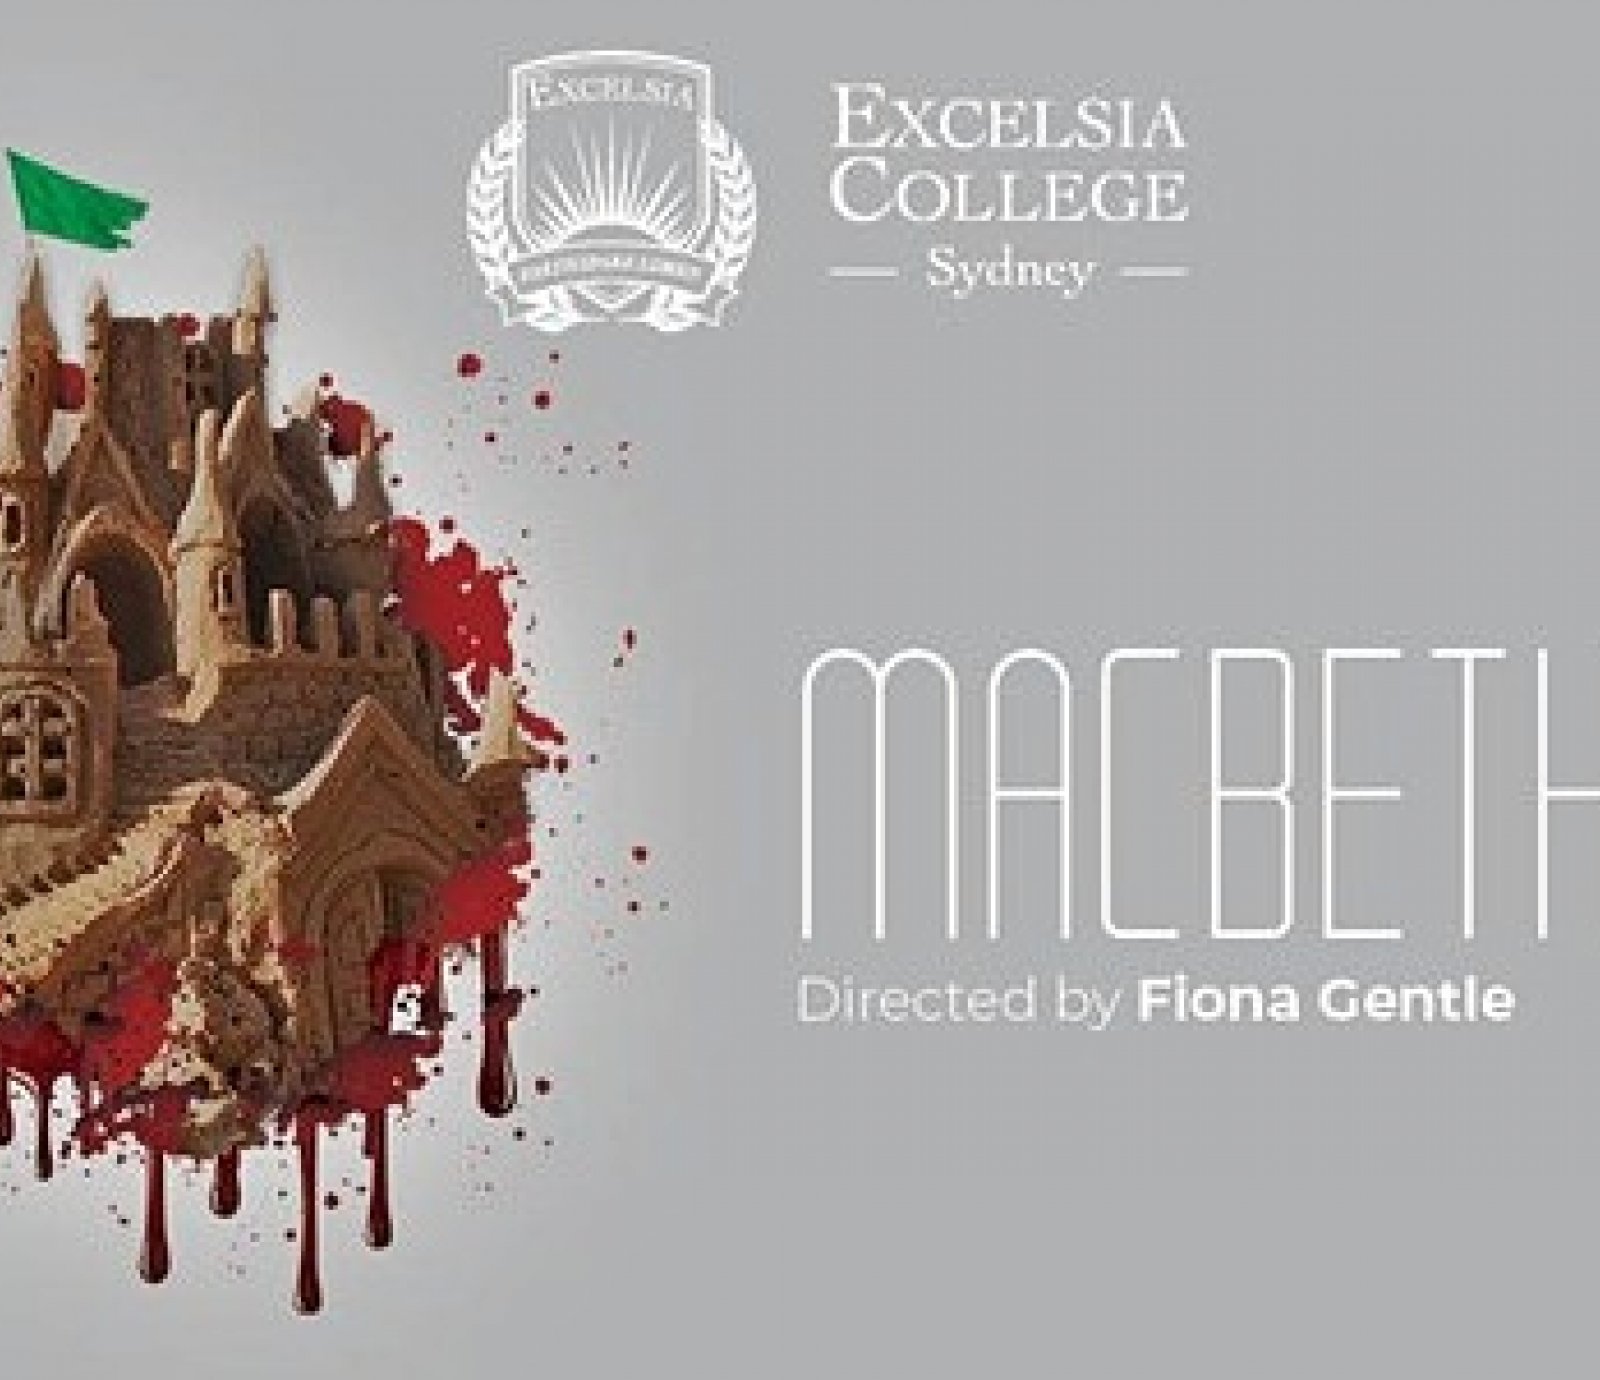 Macbeth by William Shakespeare (by Excelsia College)